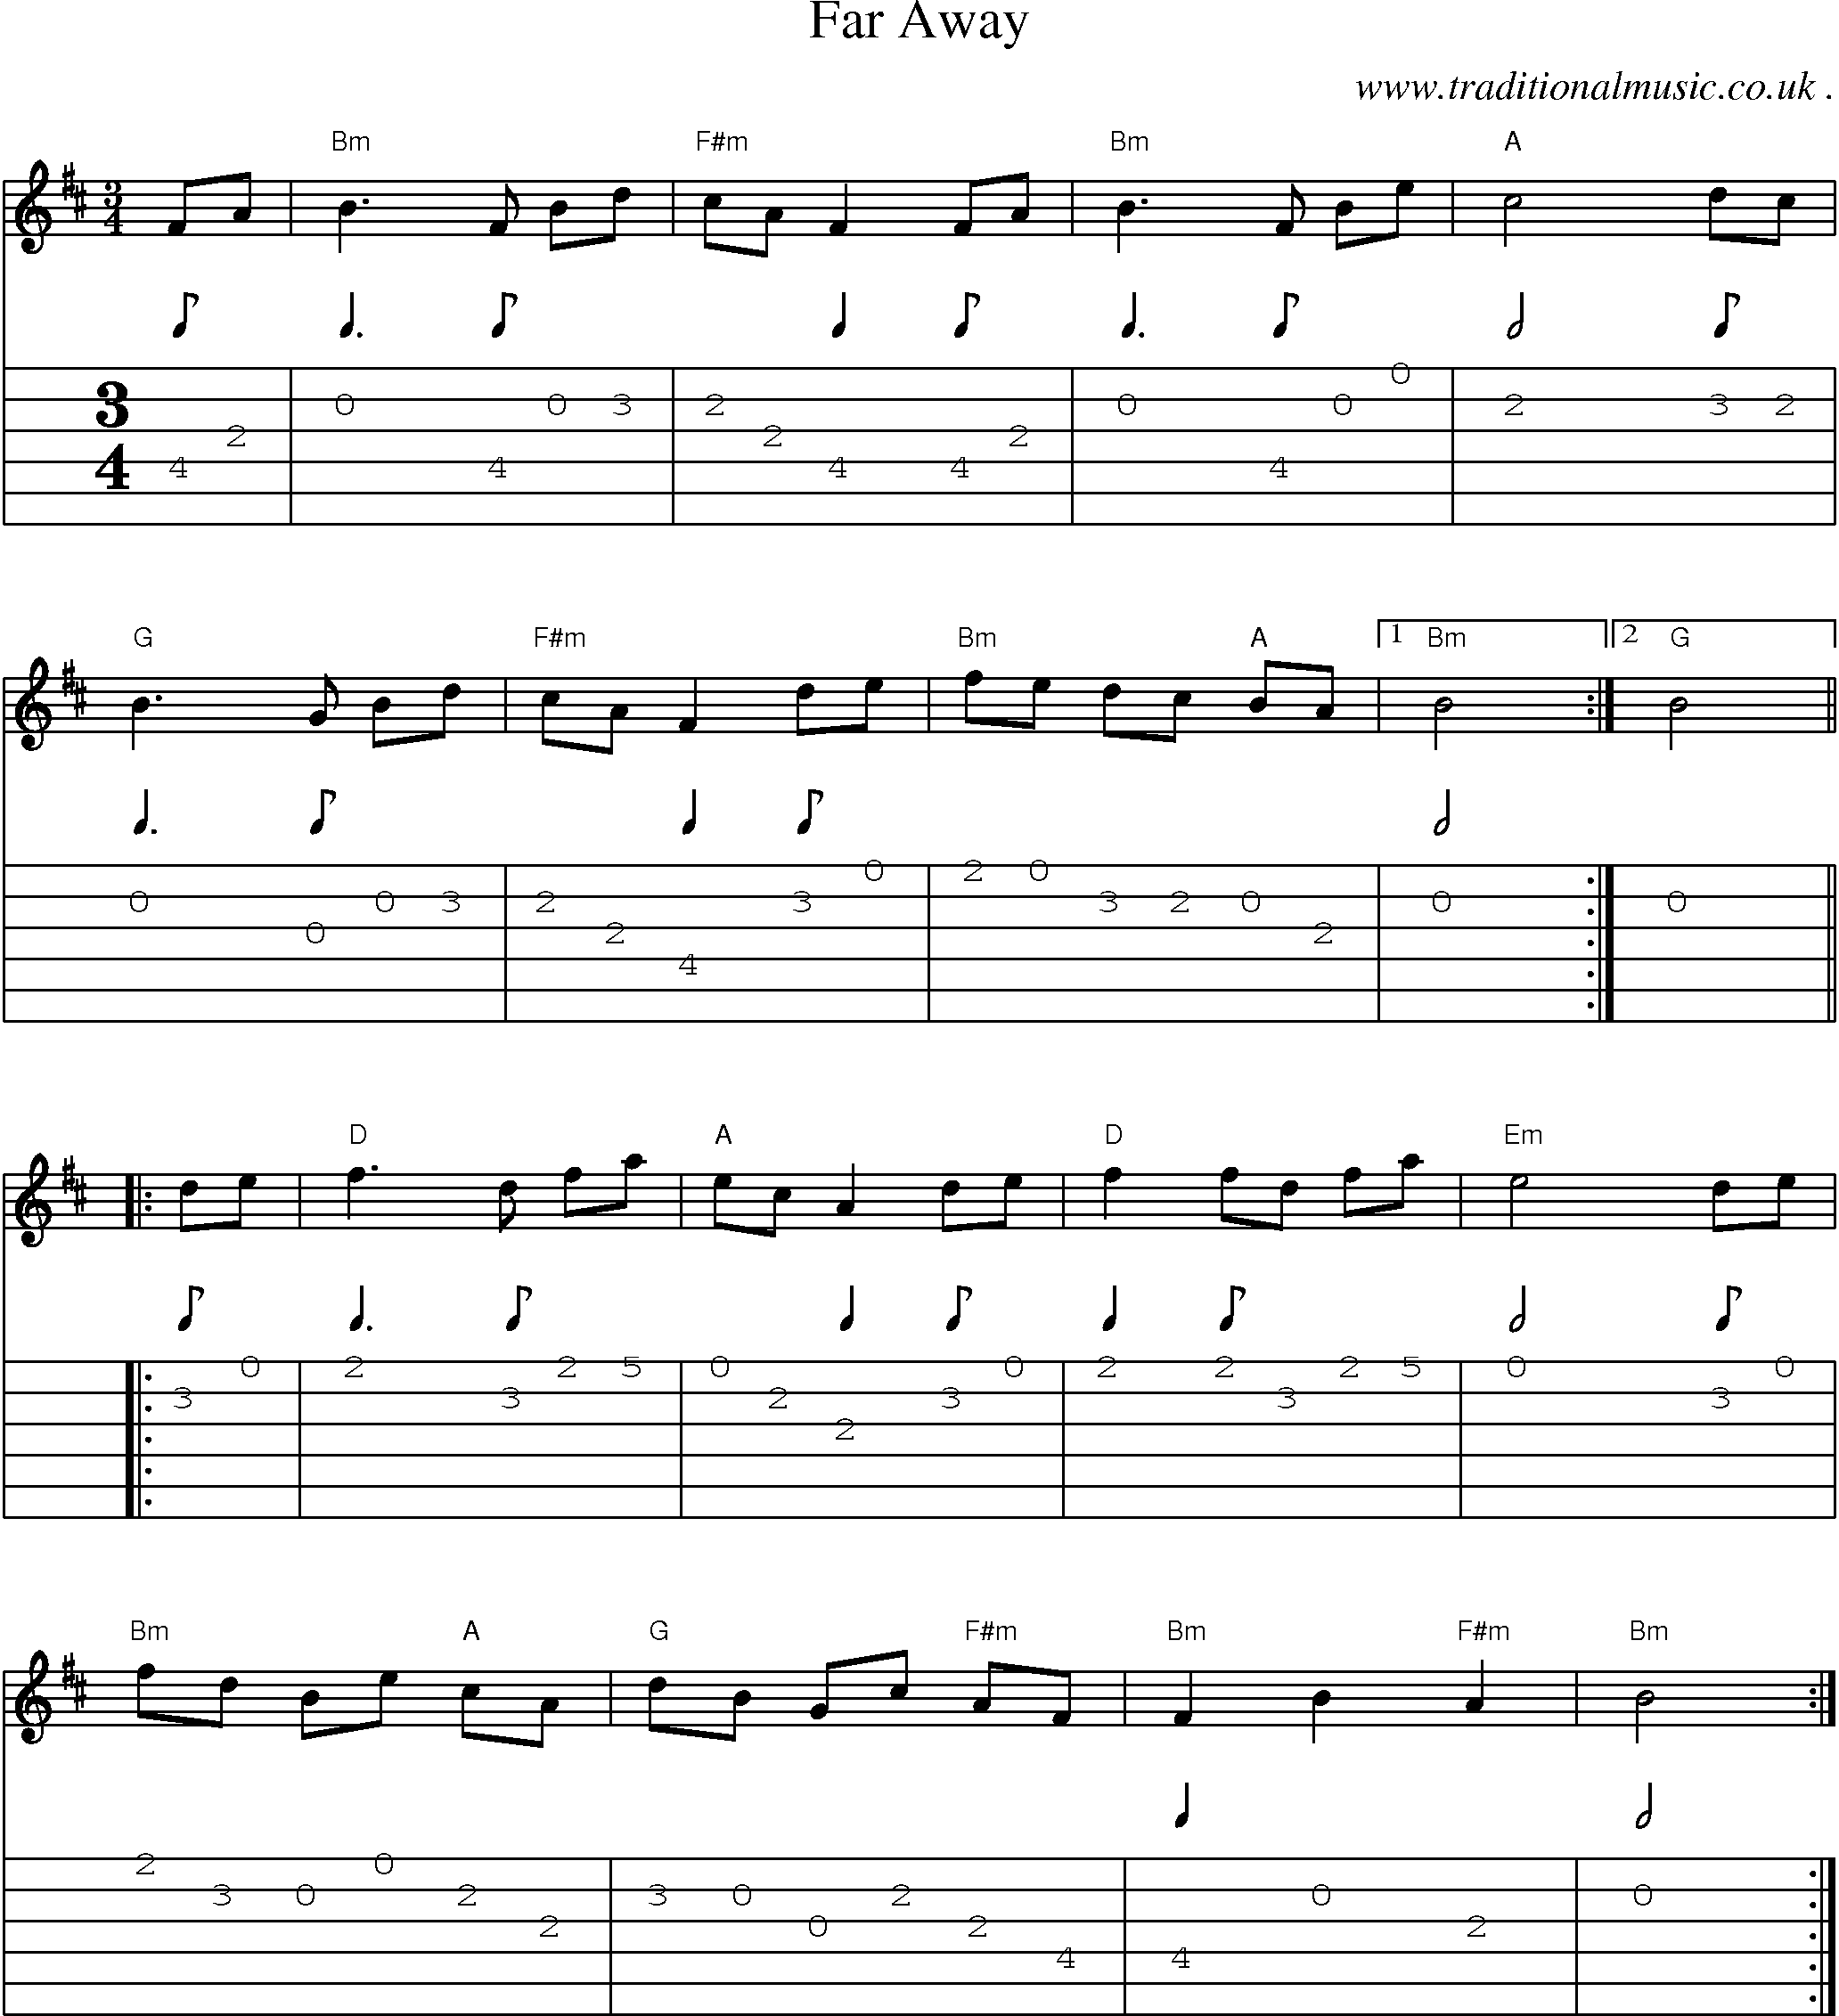 Music Score and Guitar Tabs for Far Away